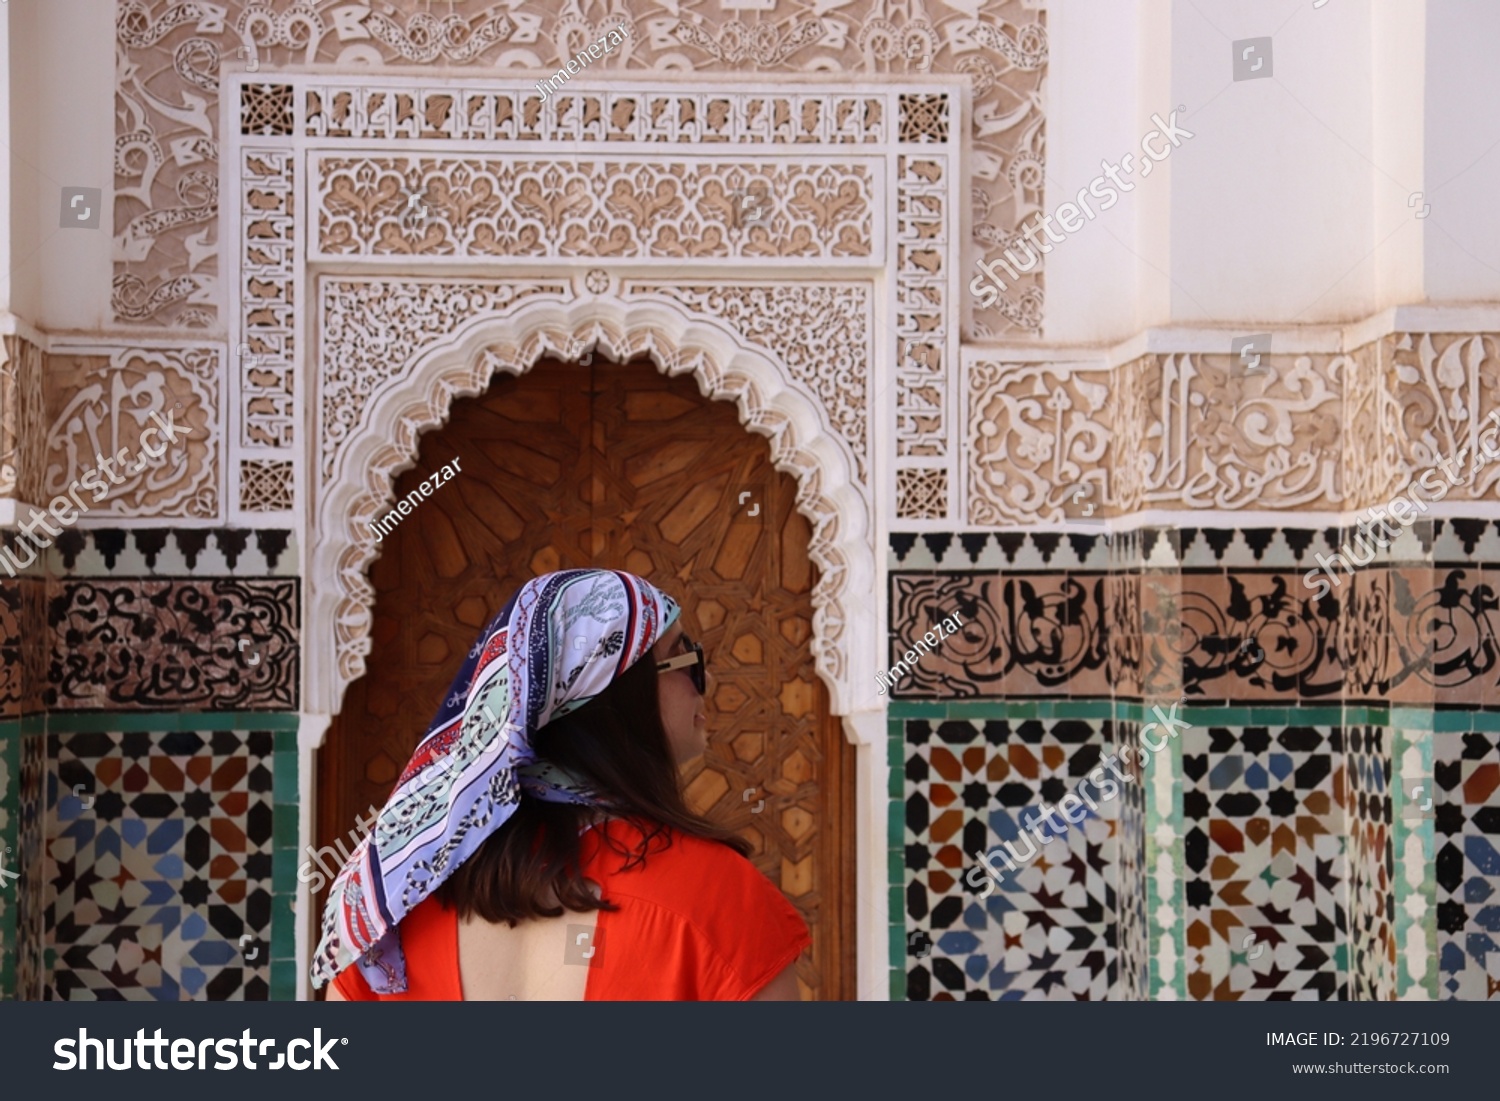 Tourist woman with scarf in a monument of Marrakech (Morocco) #2196727109